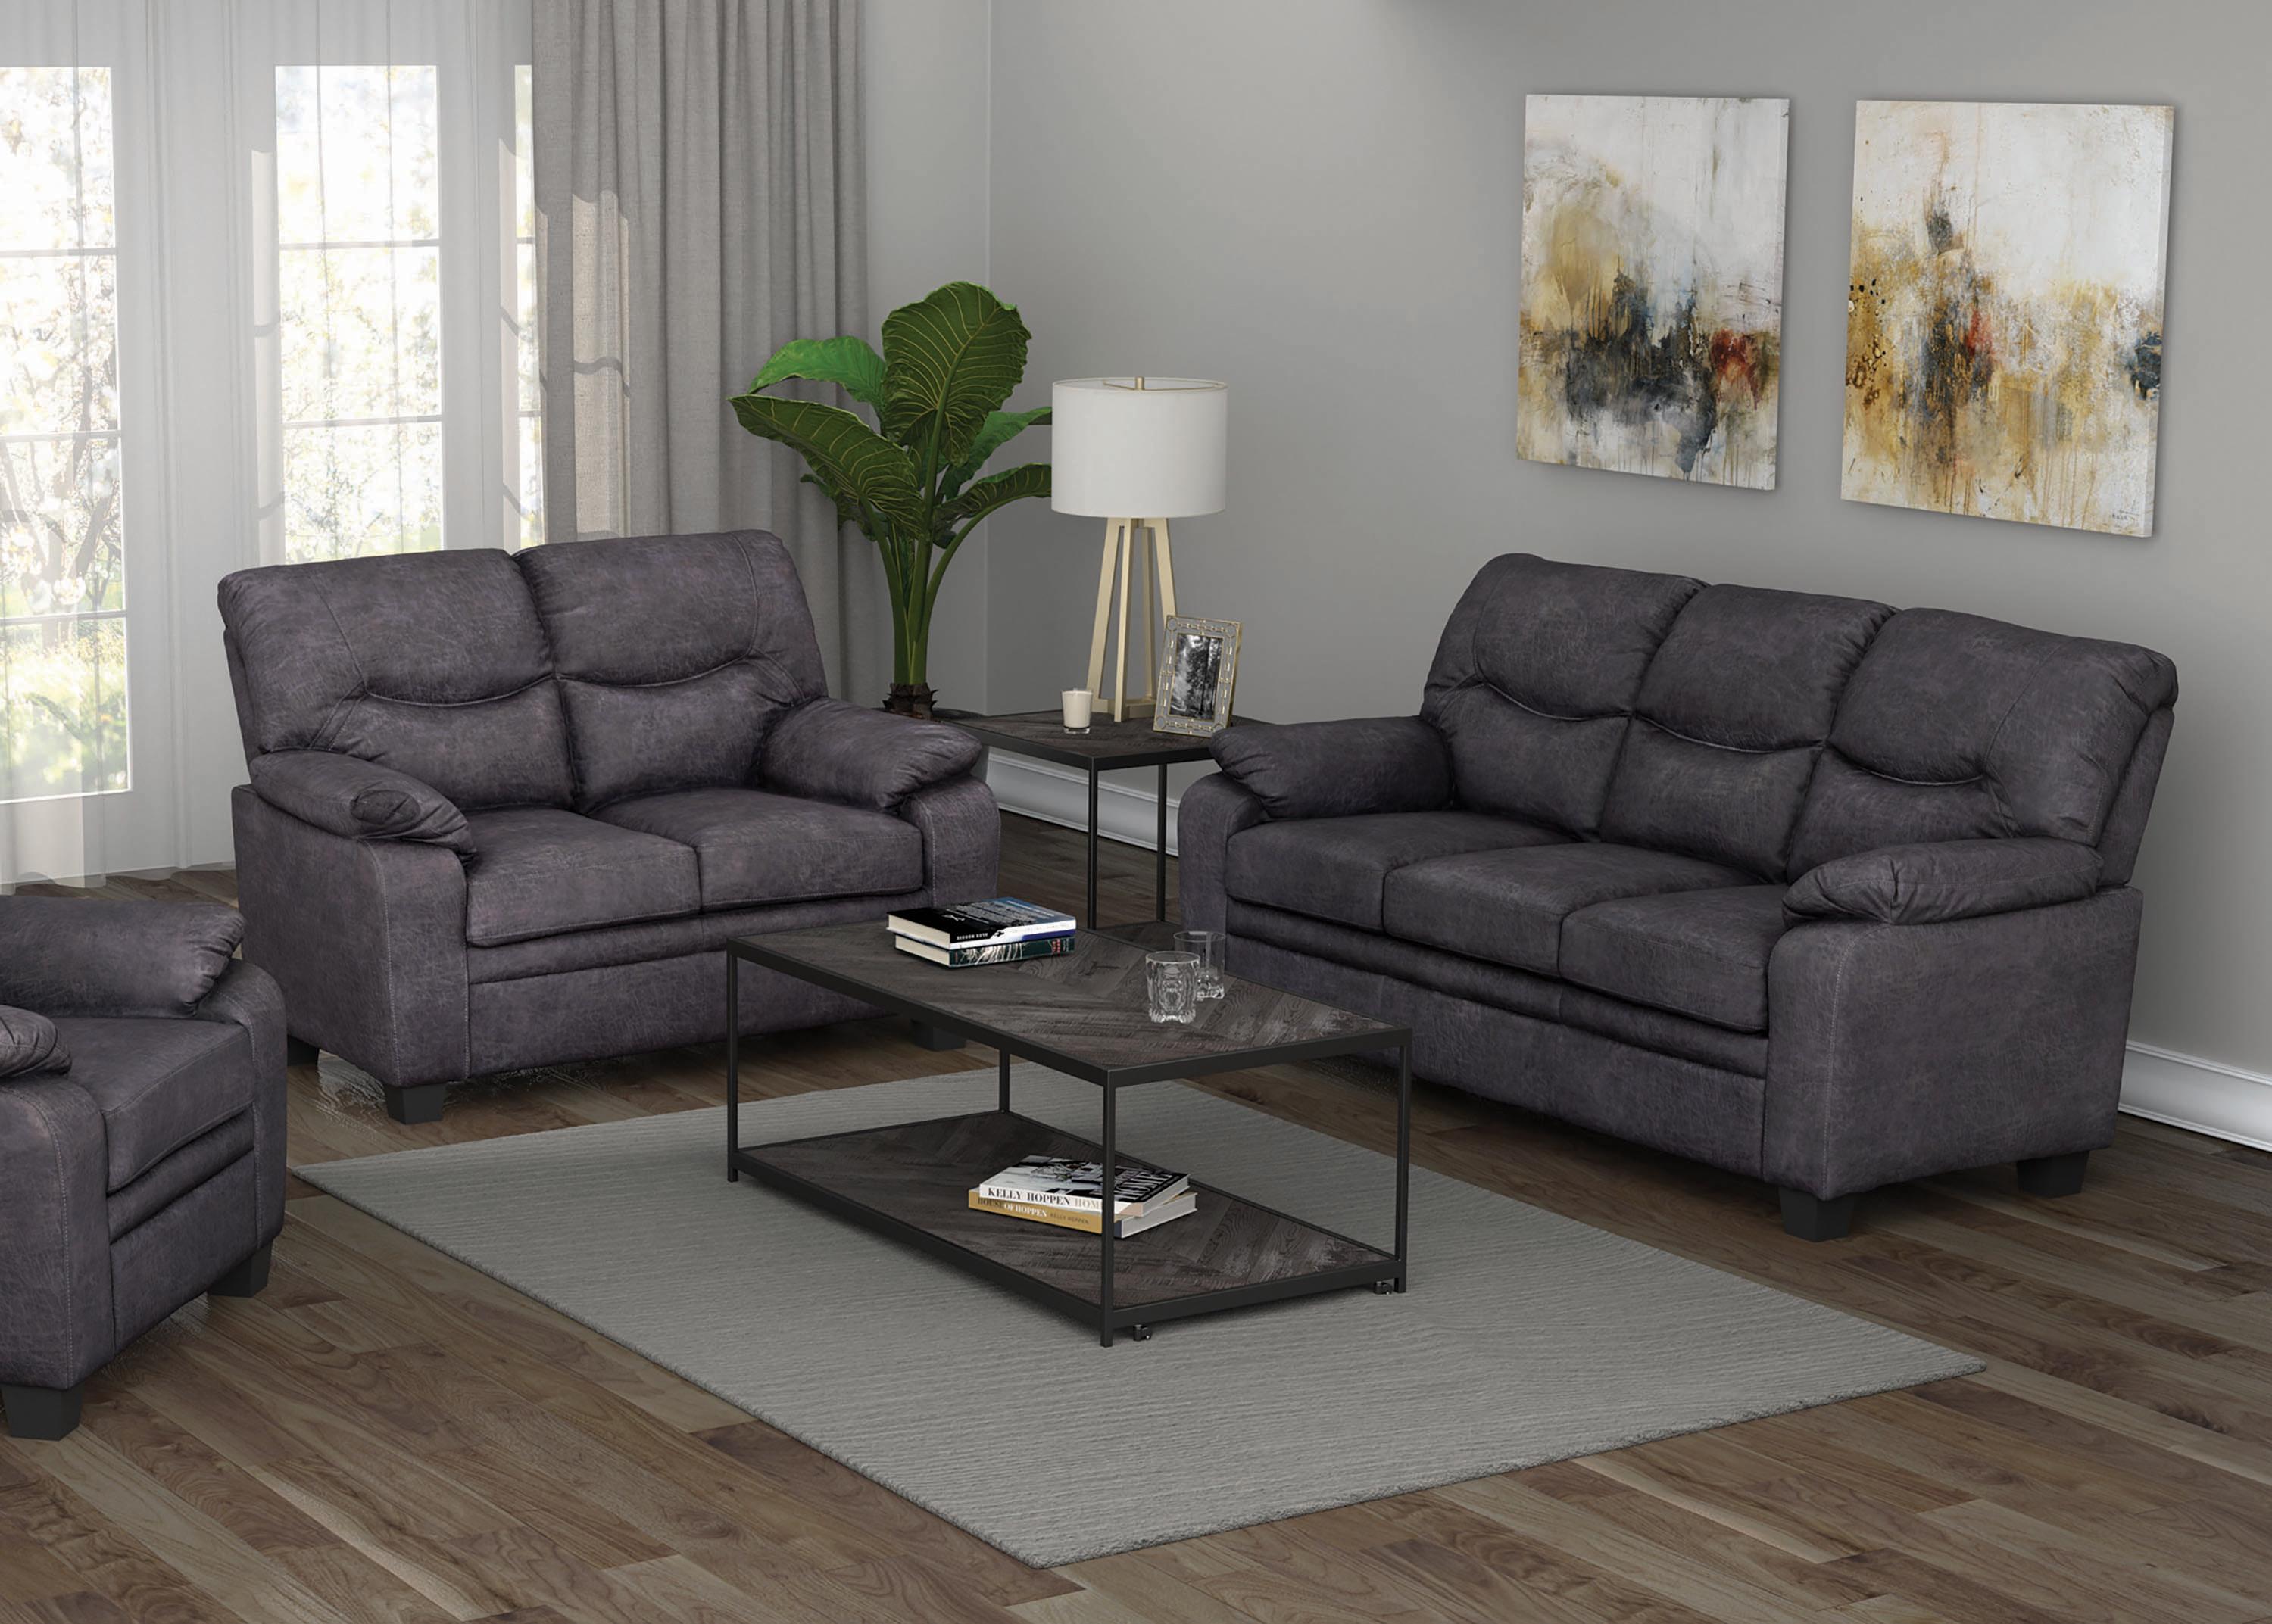 Classic Living Room Set 506564-S2 Meagan 506564-S2 in Charcoal 